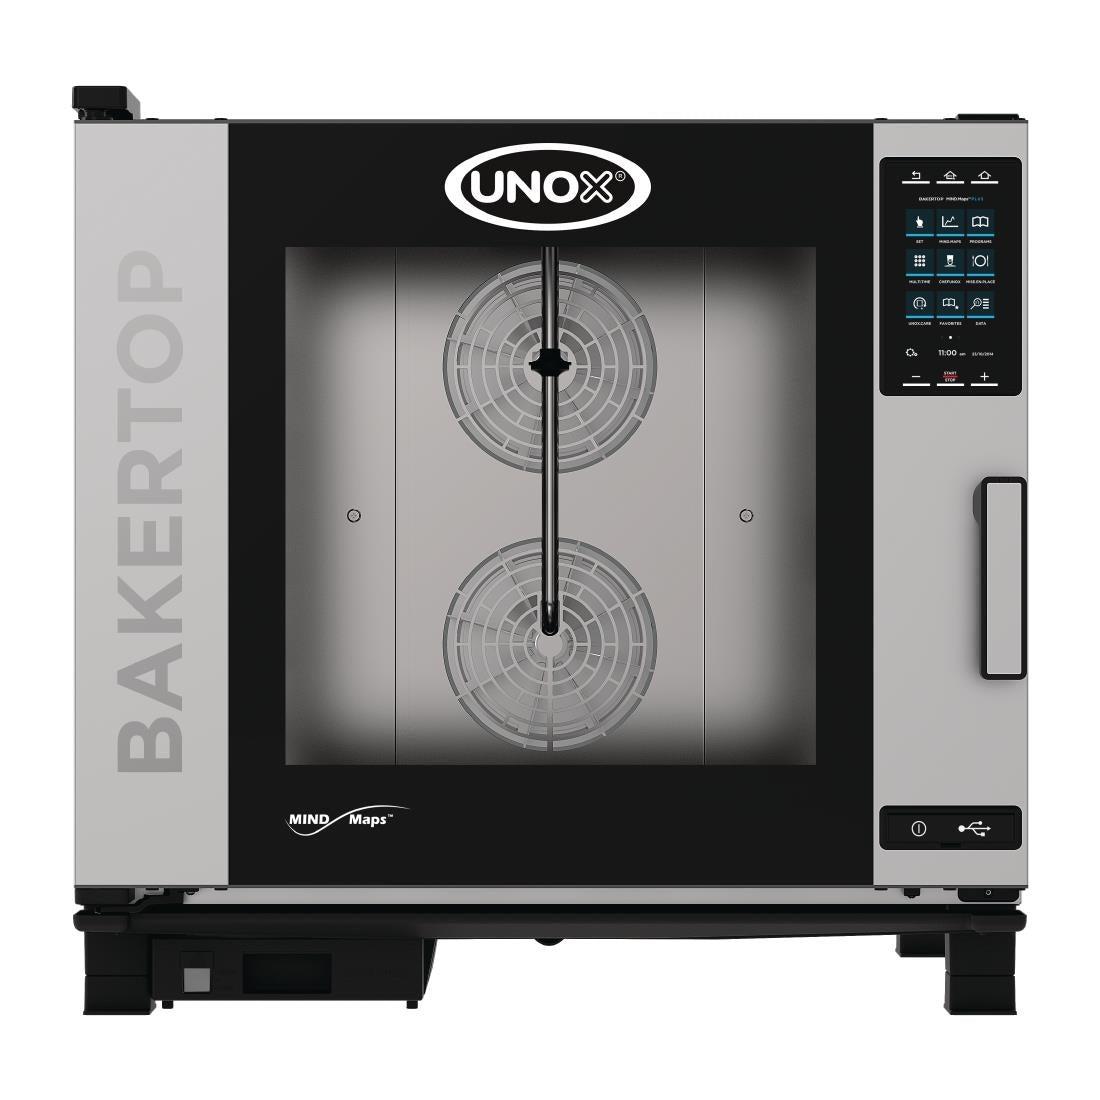 Unox BAKERTOP MIND Maps Plus 6x 600x400 Gas Combi with Commissioning